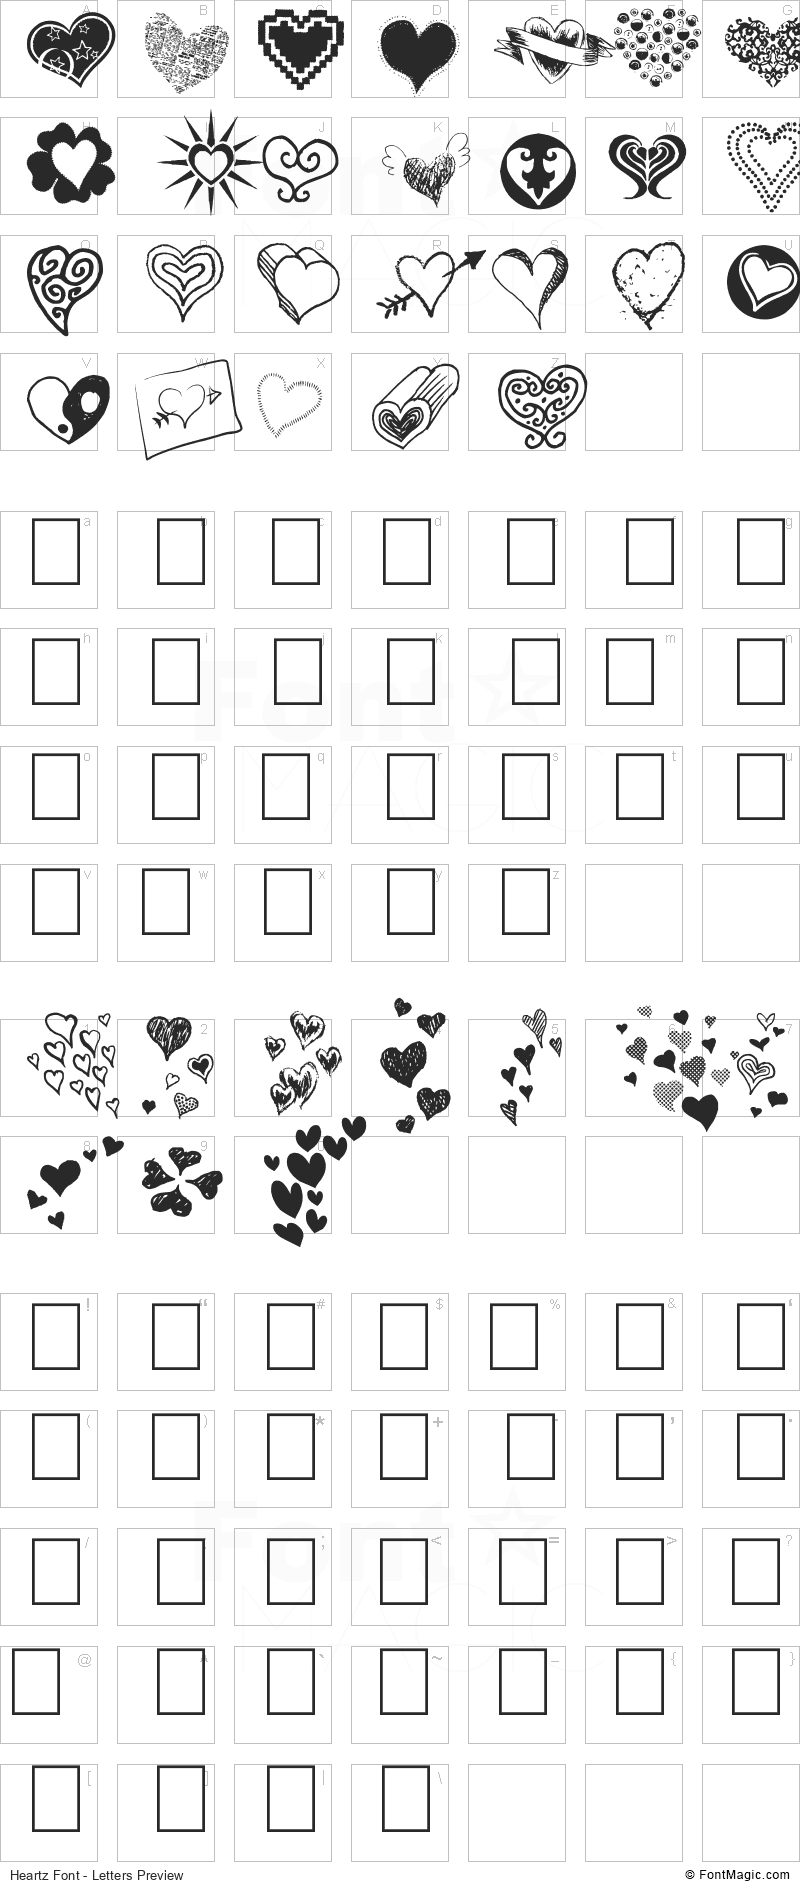 Heartz Font - All Latters Preview Chart